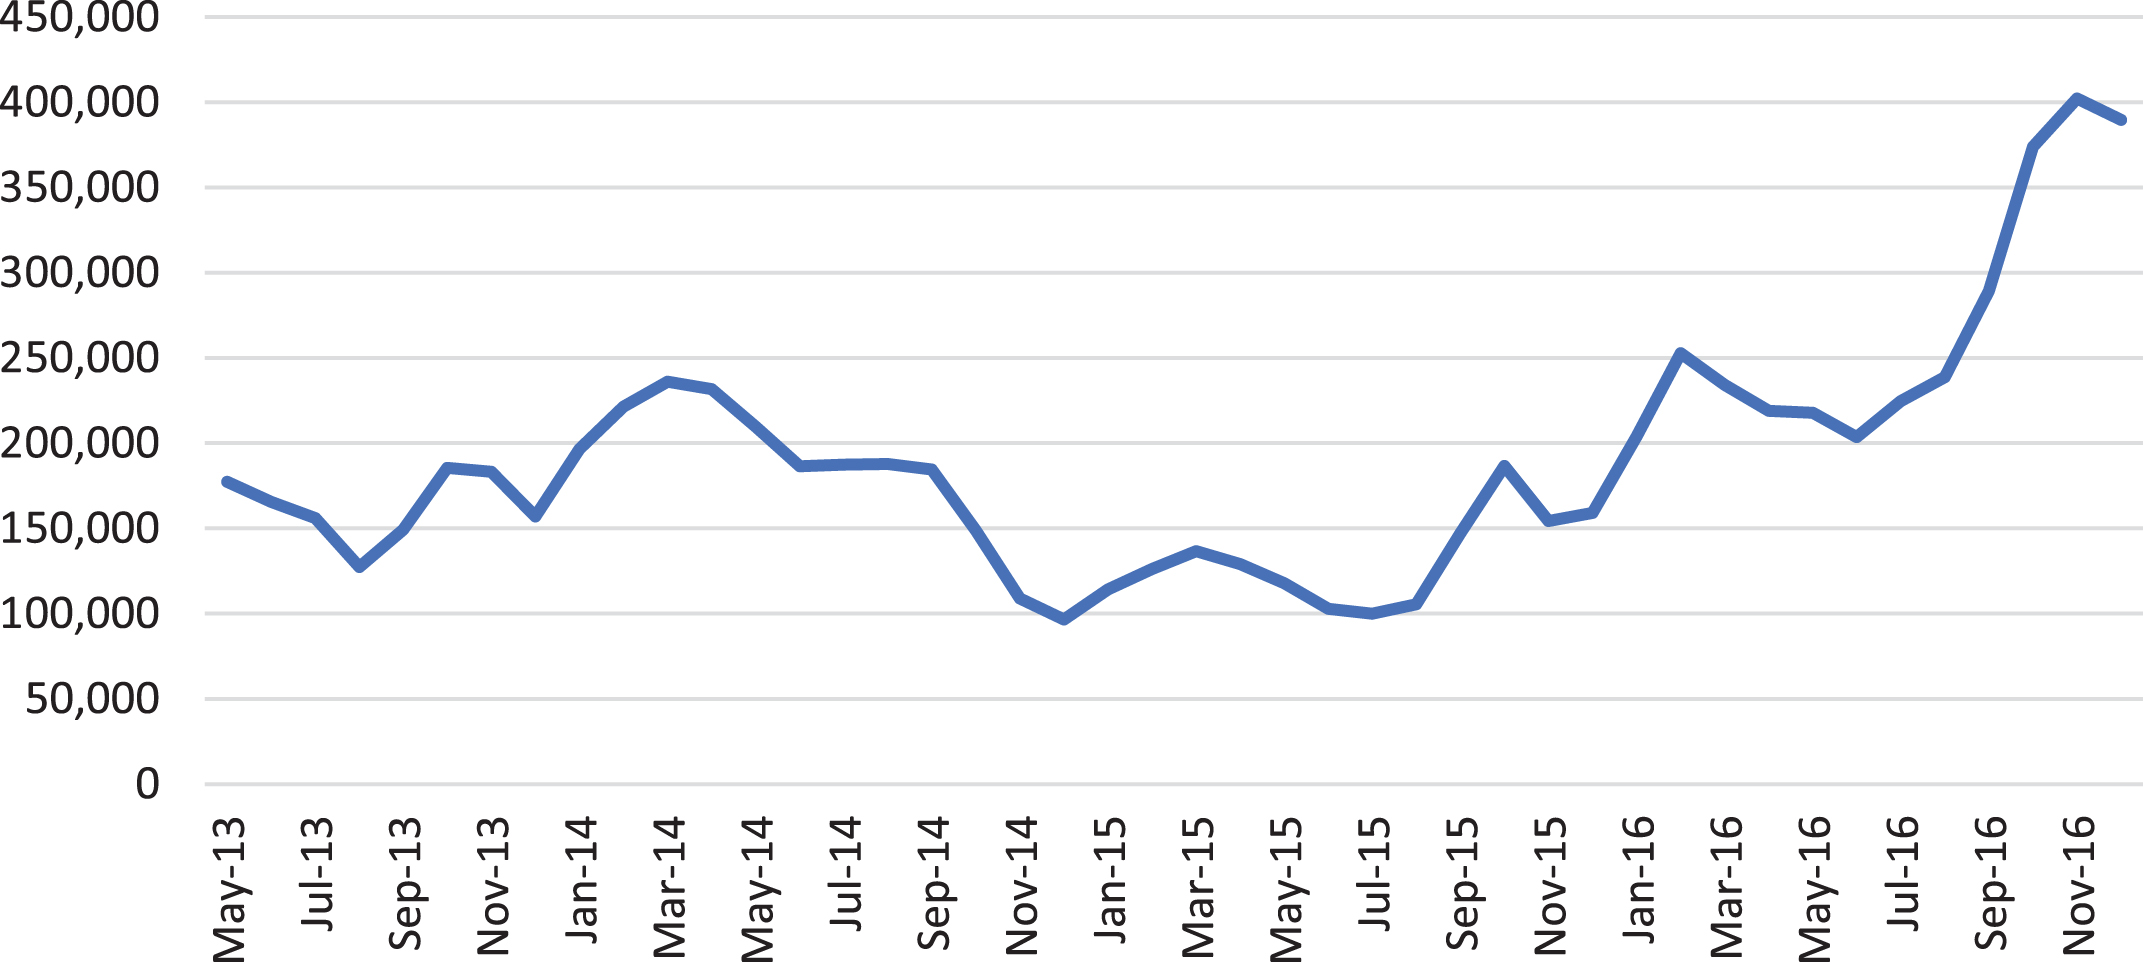 Number of GARD website users. The number of unique visits to the GARD Website by month since May 2013.